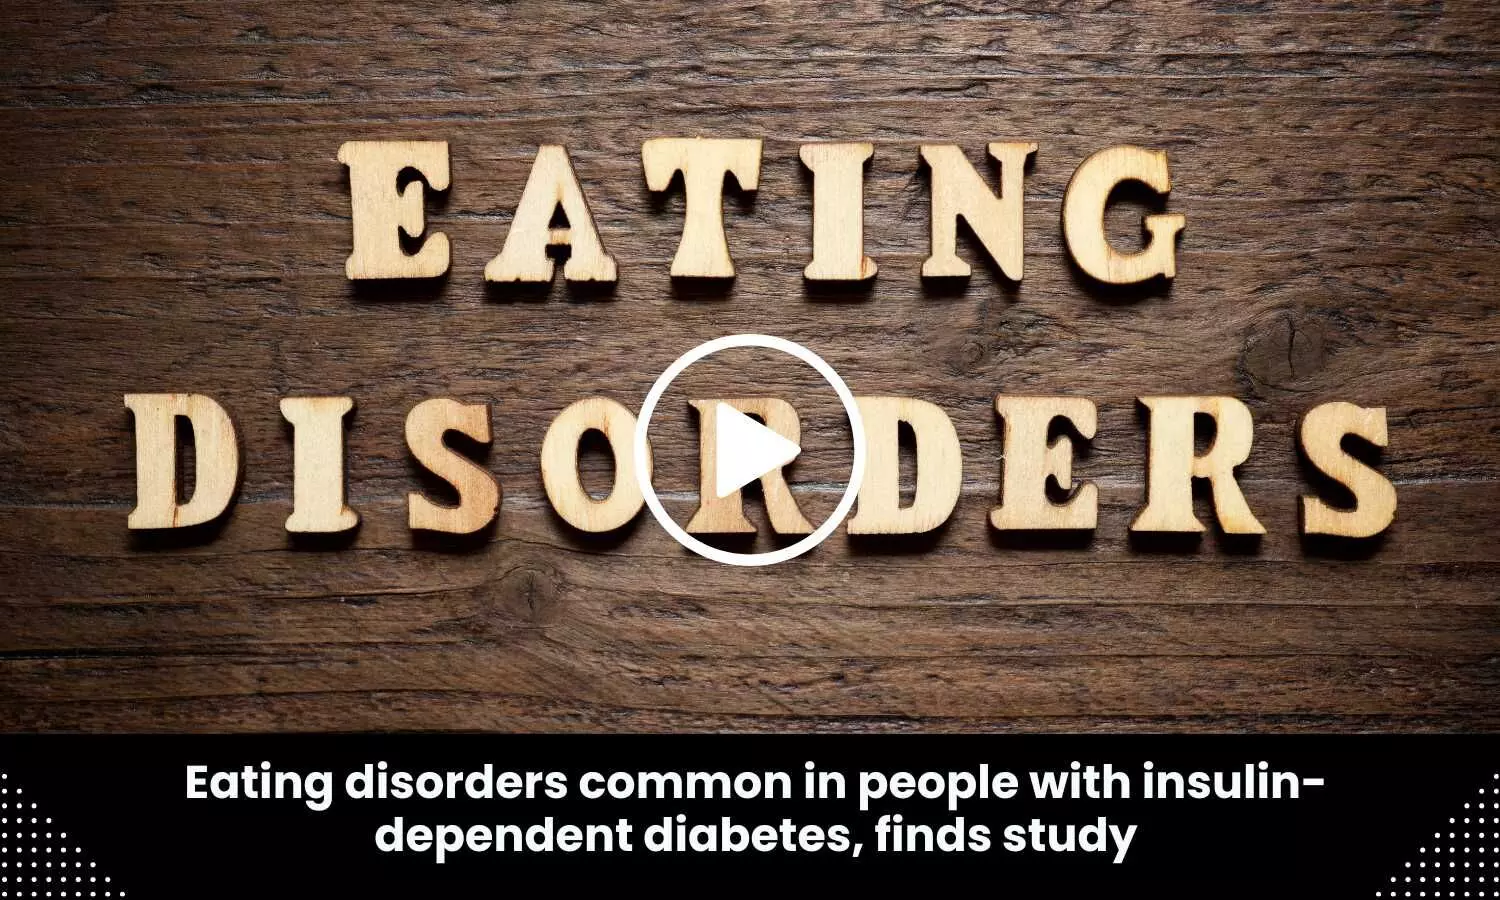 Eating disorders common in people with insulin-dependent diabetes, finds study